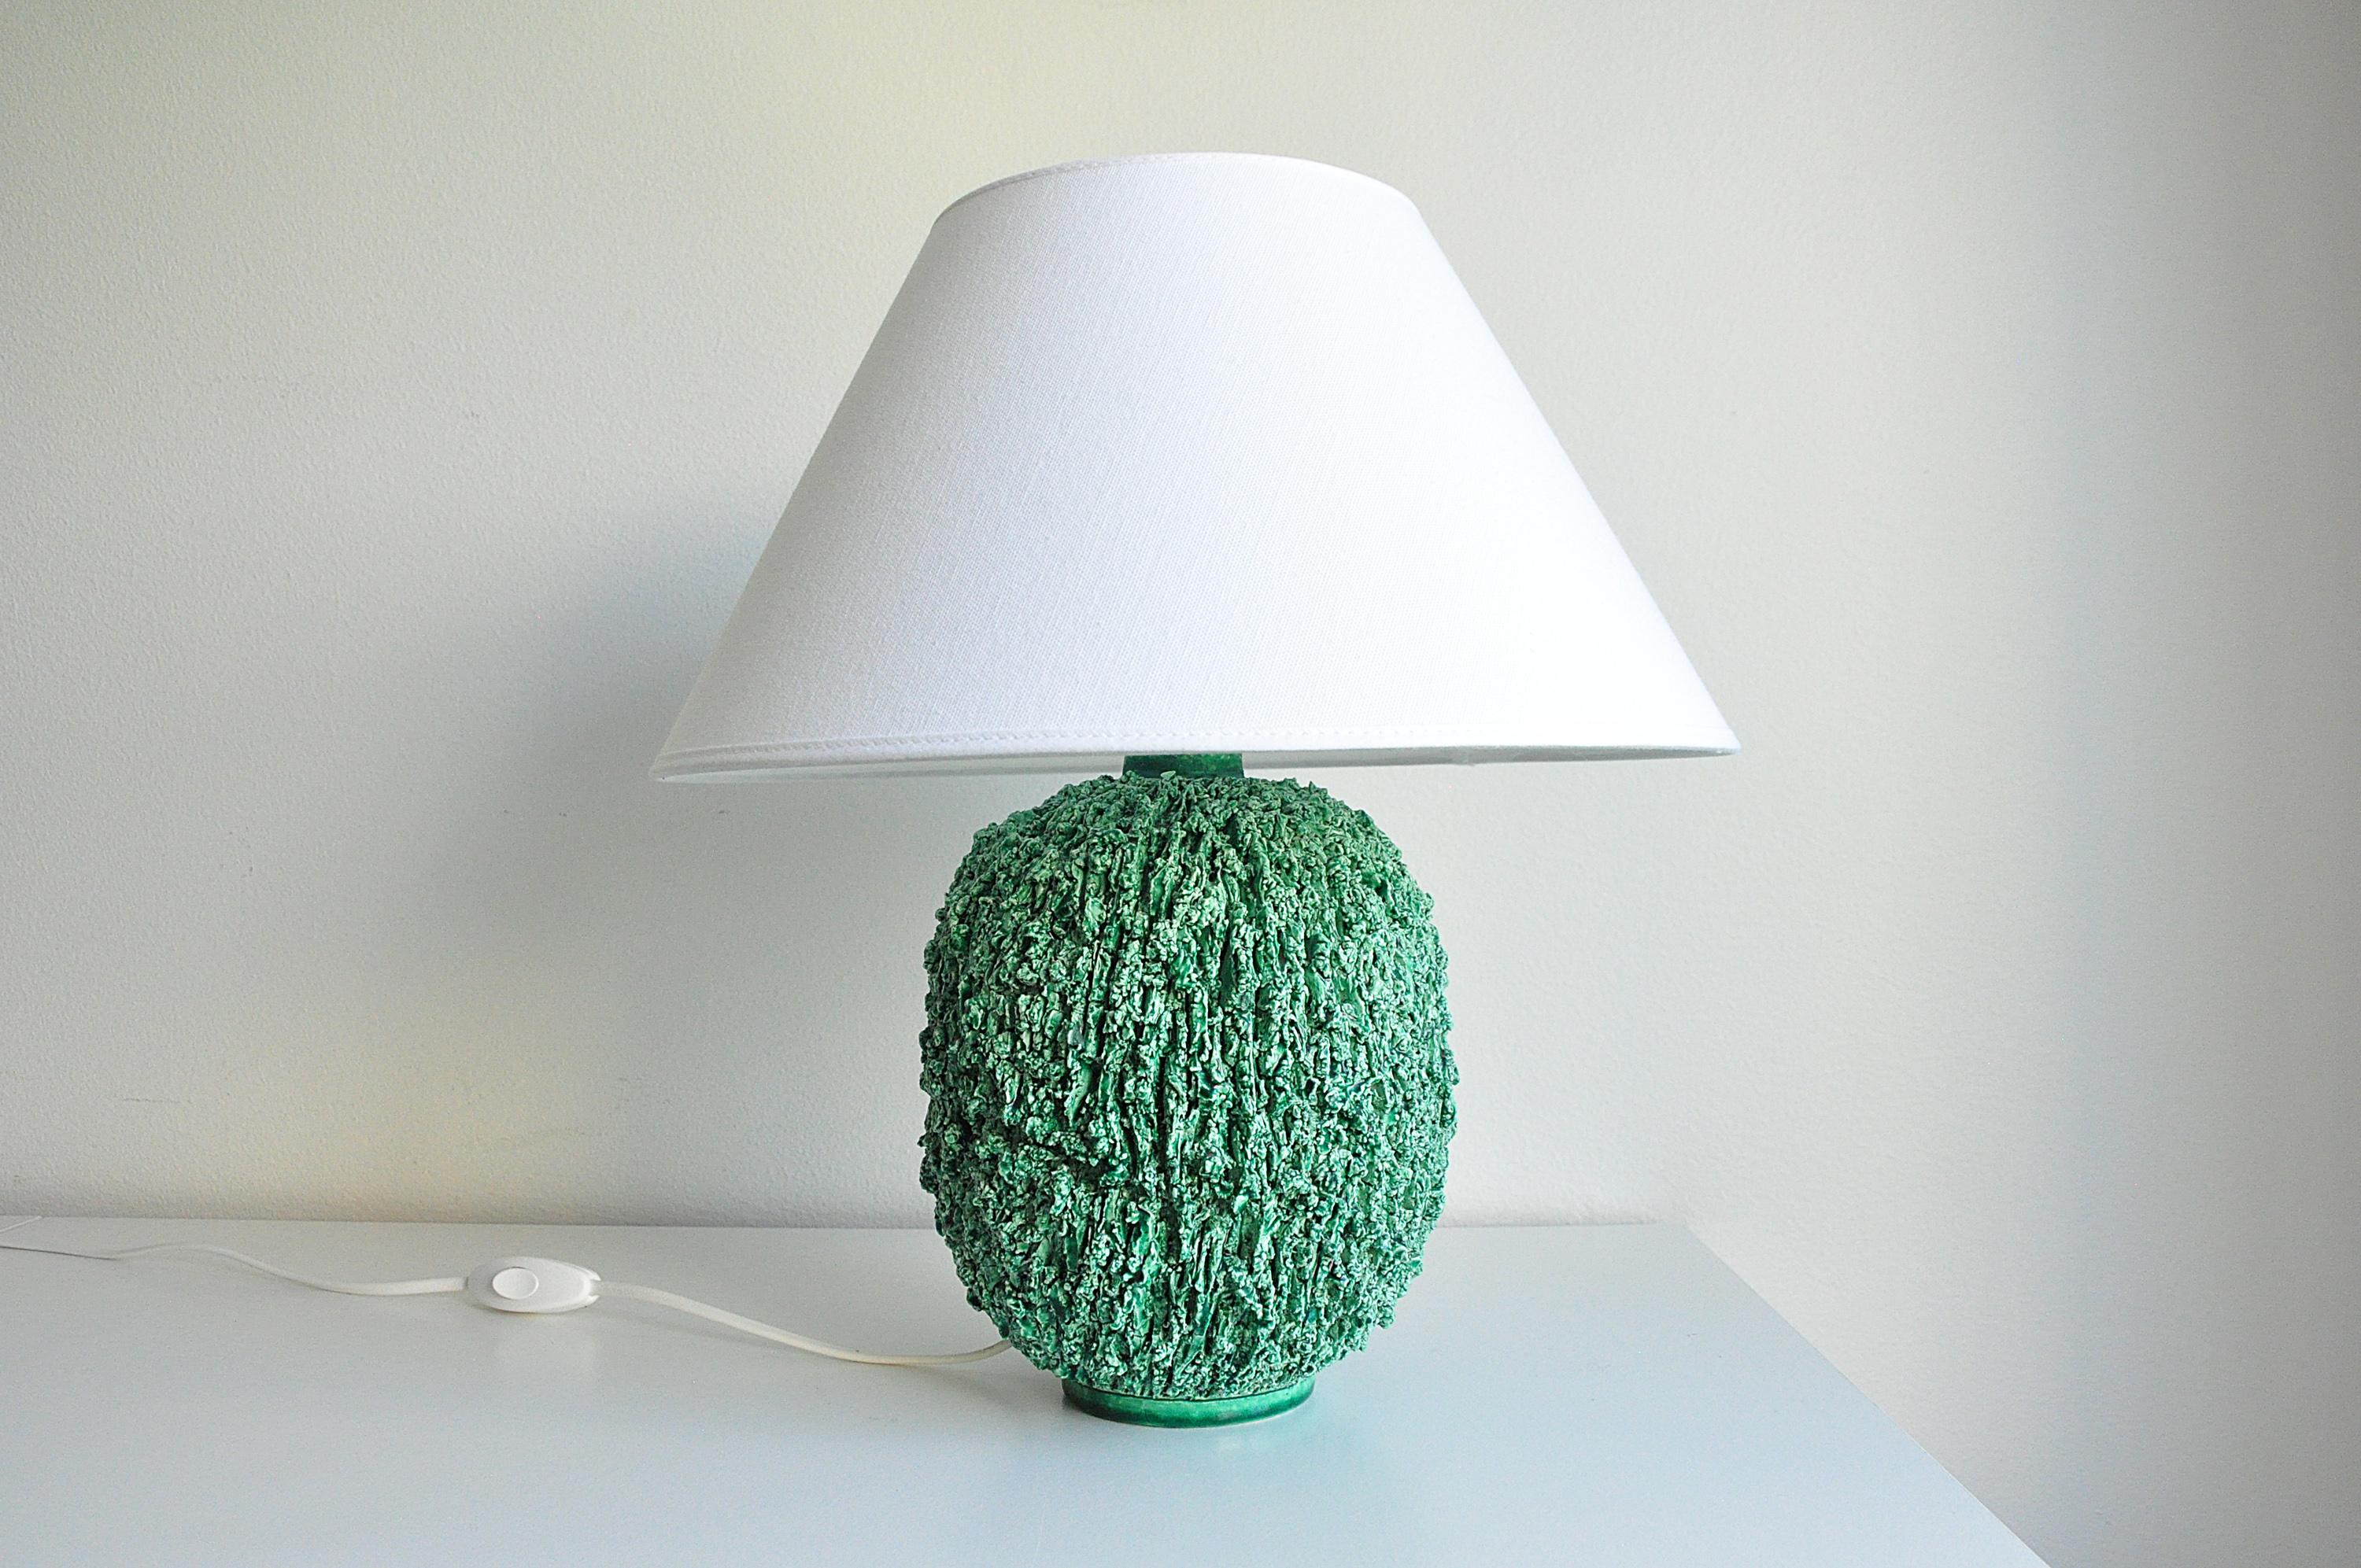 Gunnar Nylund ''Chamotte'' Table Lamp for Rörstrand.
The lamp is made of chamotte clay and finished with a green colored luster glaze. New wiring, Please note: the shade is not included.